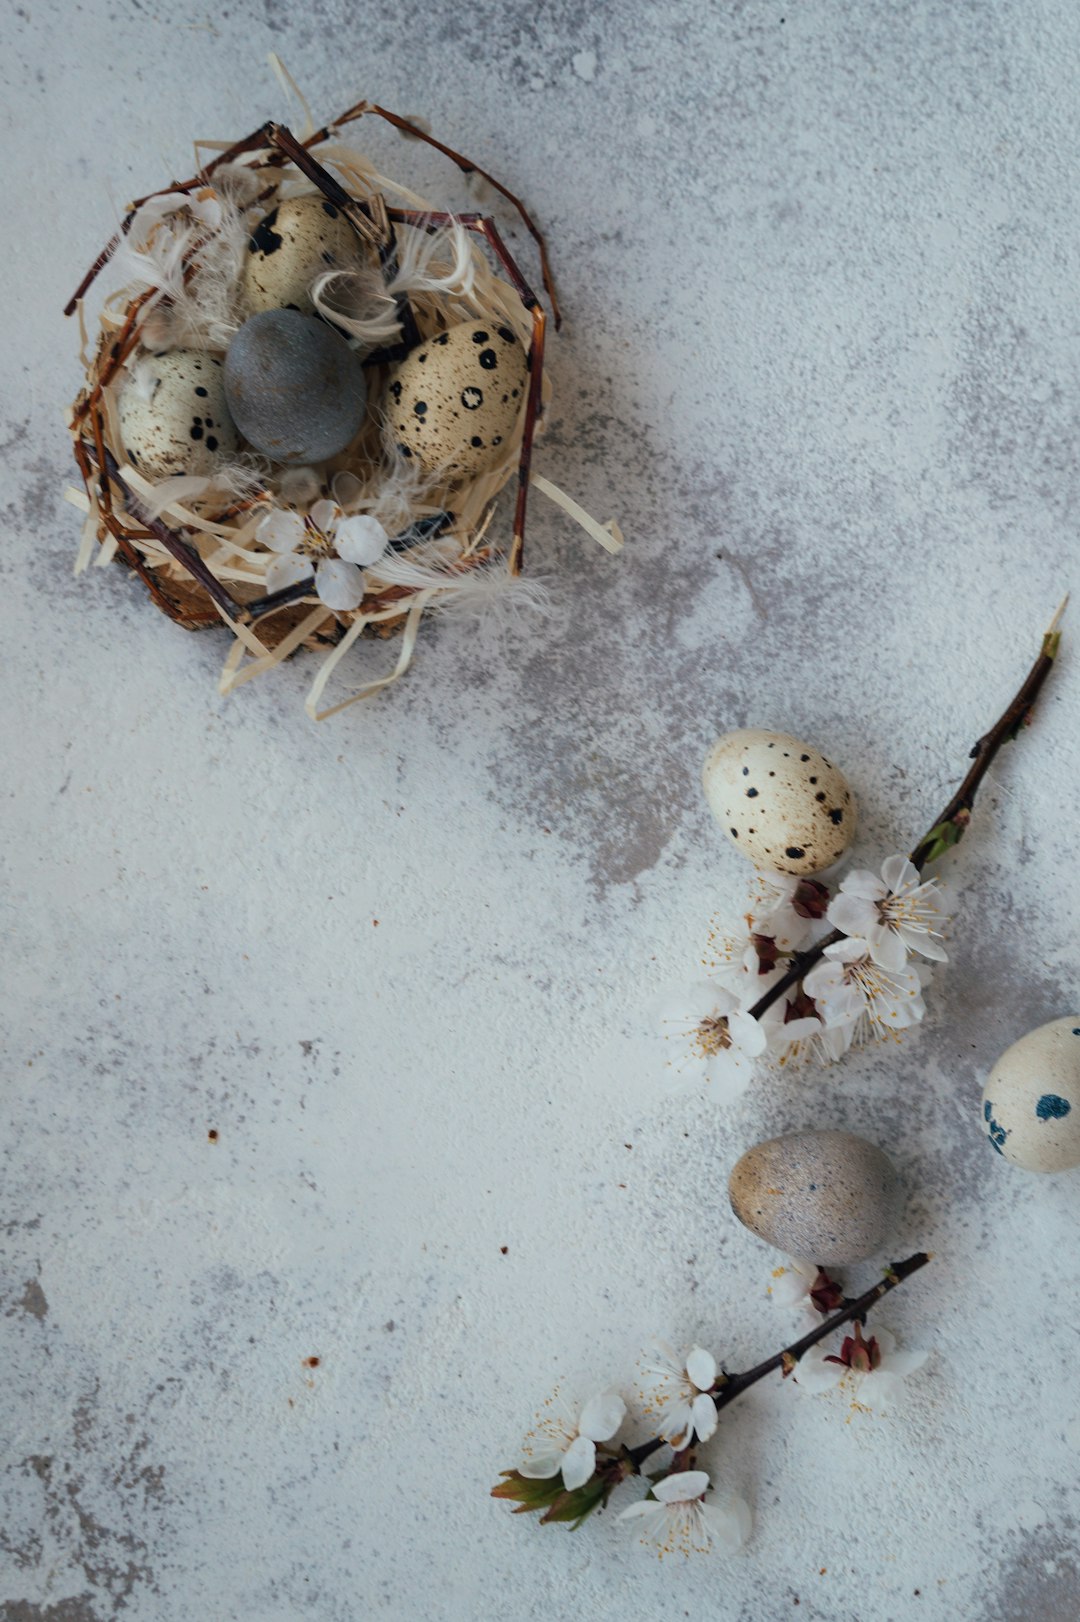 white and brown round fruits on white sand